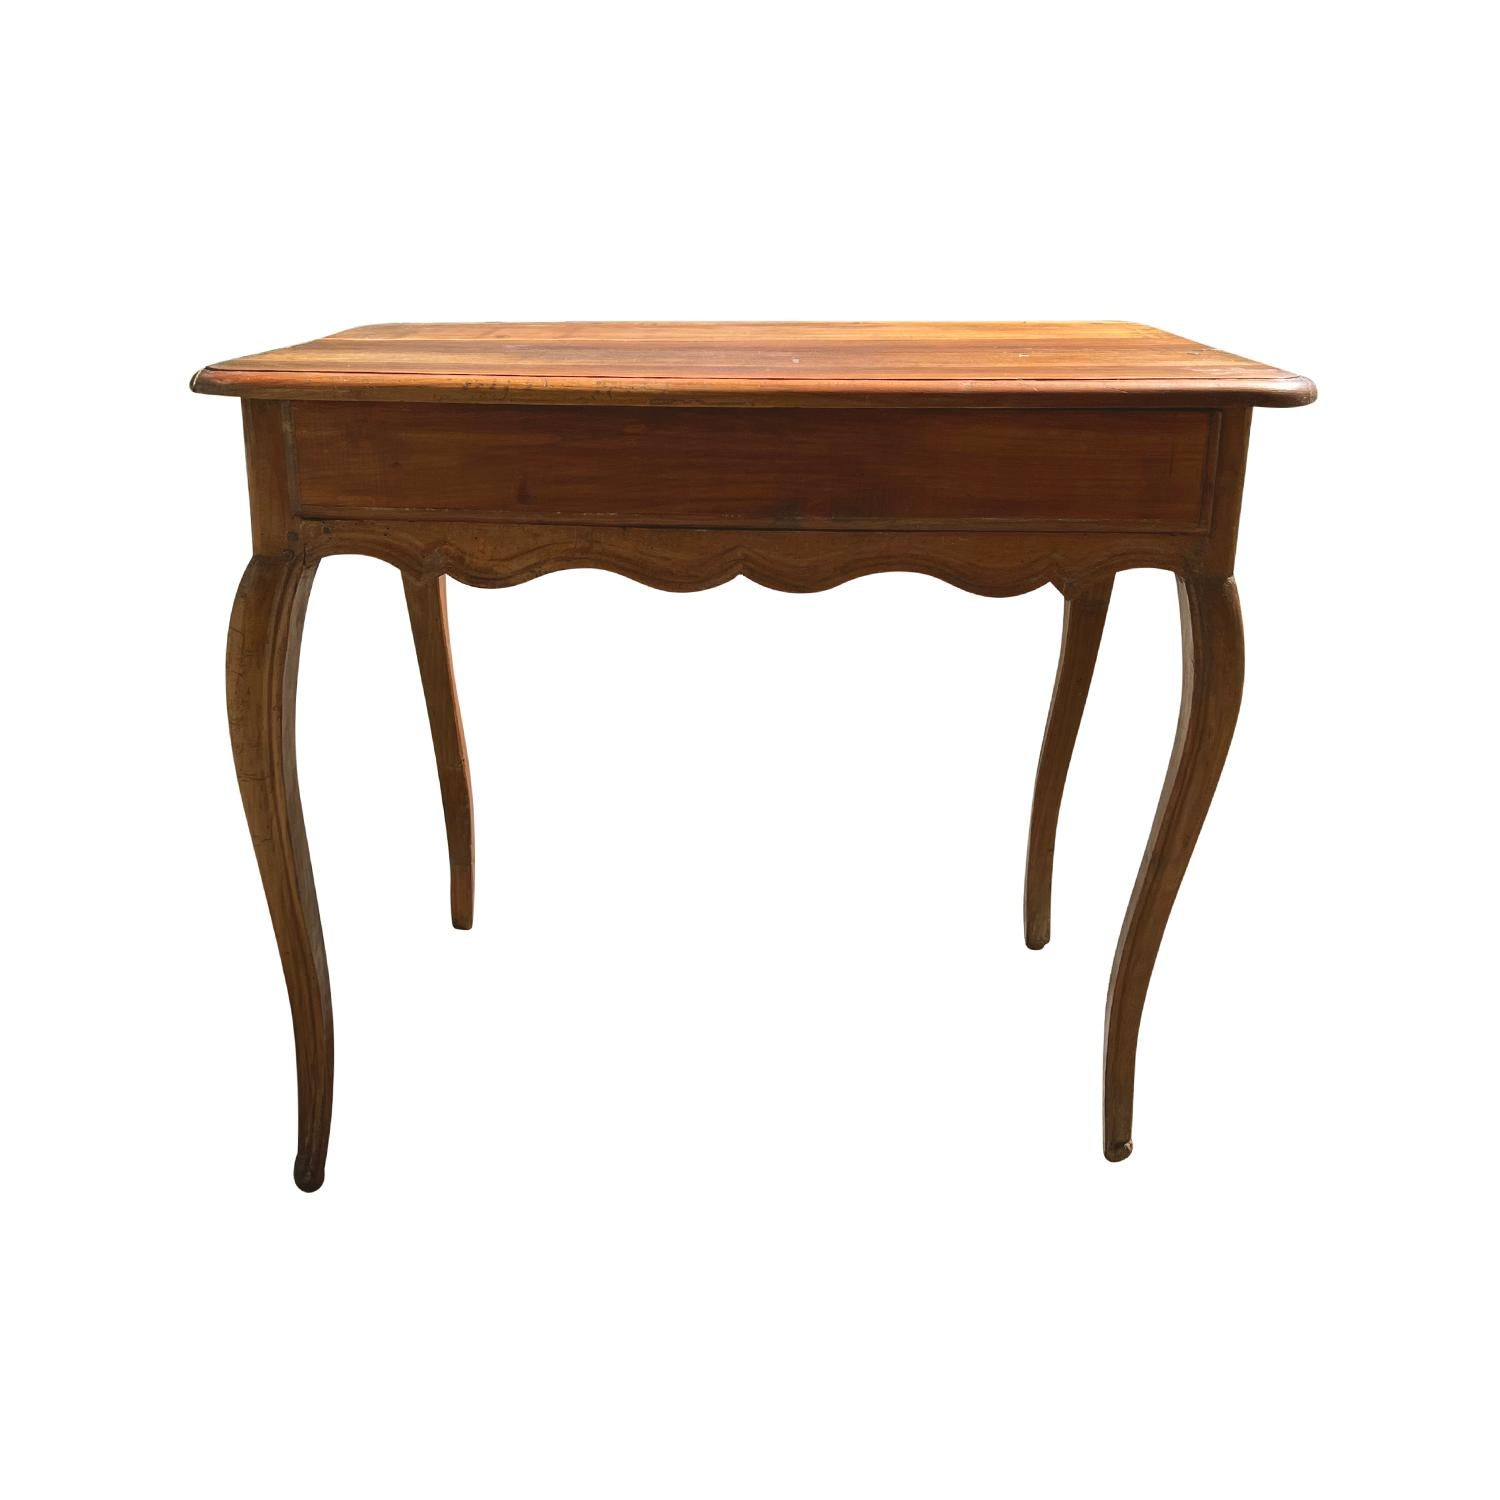 An early 19th Century Baroque style center, console table from Provence, in good condition. This antique Provencal table is hand crafted in solid Walnut. It is refinished with a rich and warm colored hand waxed patina. Beautifully shaped fine